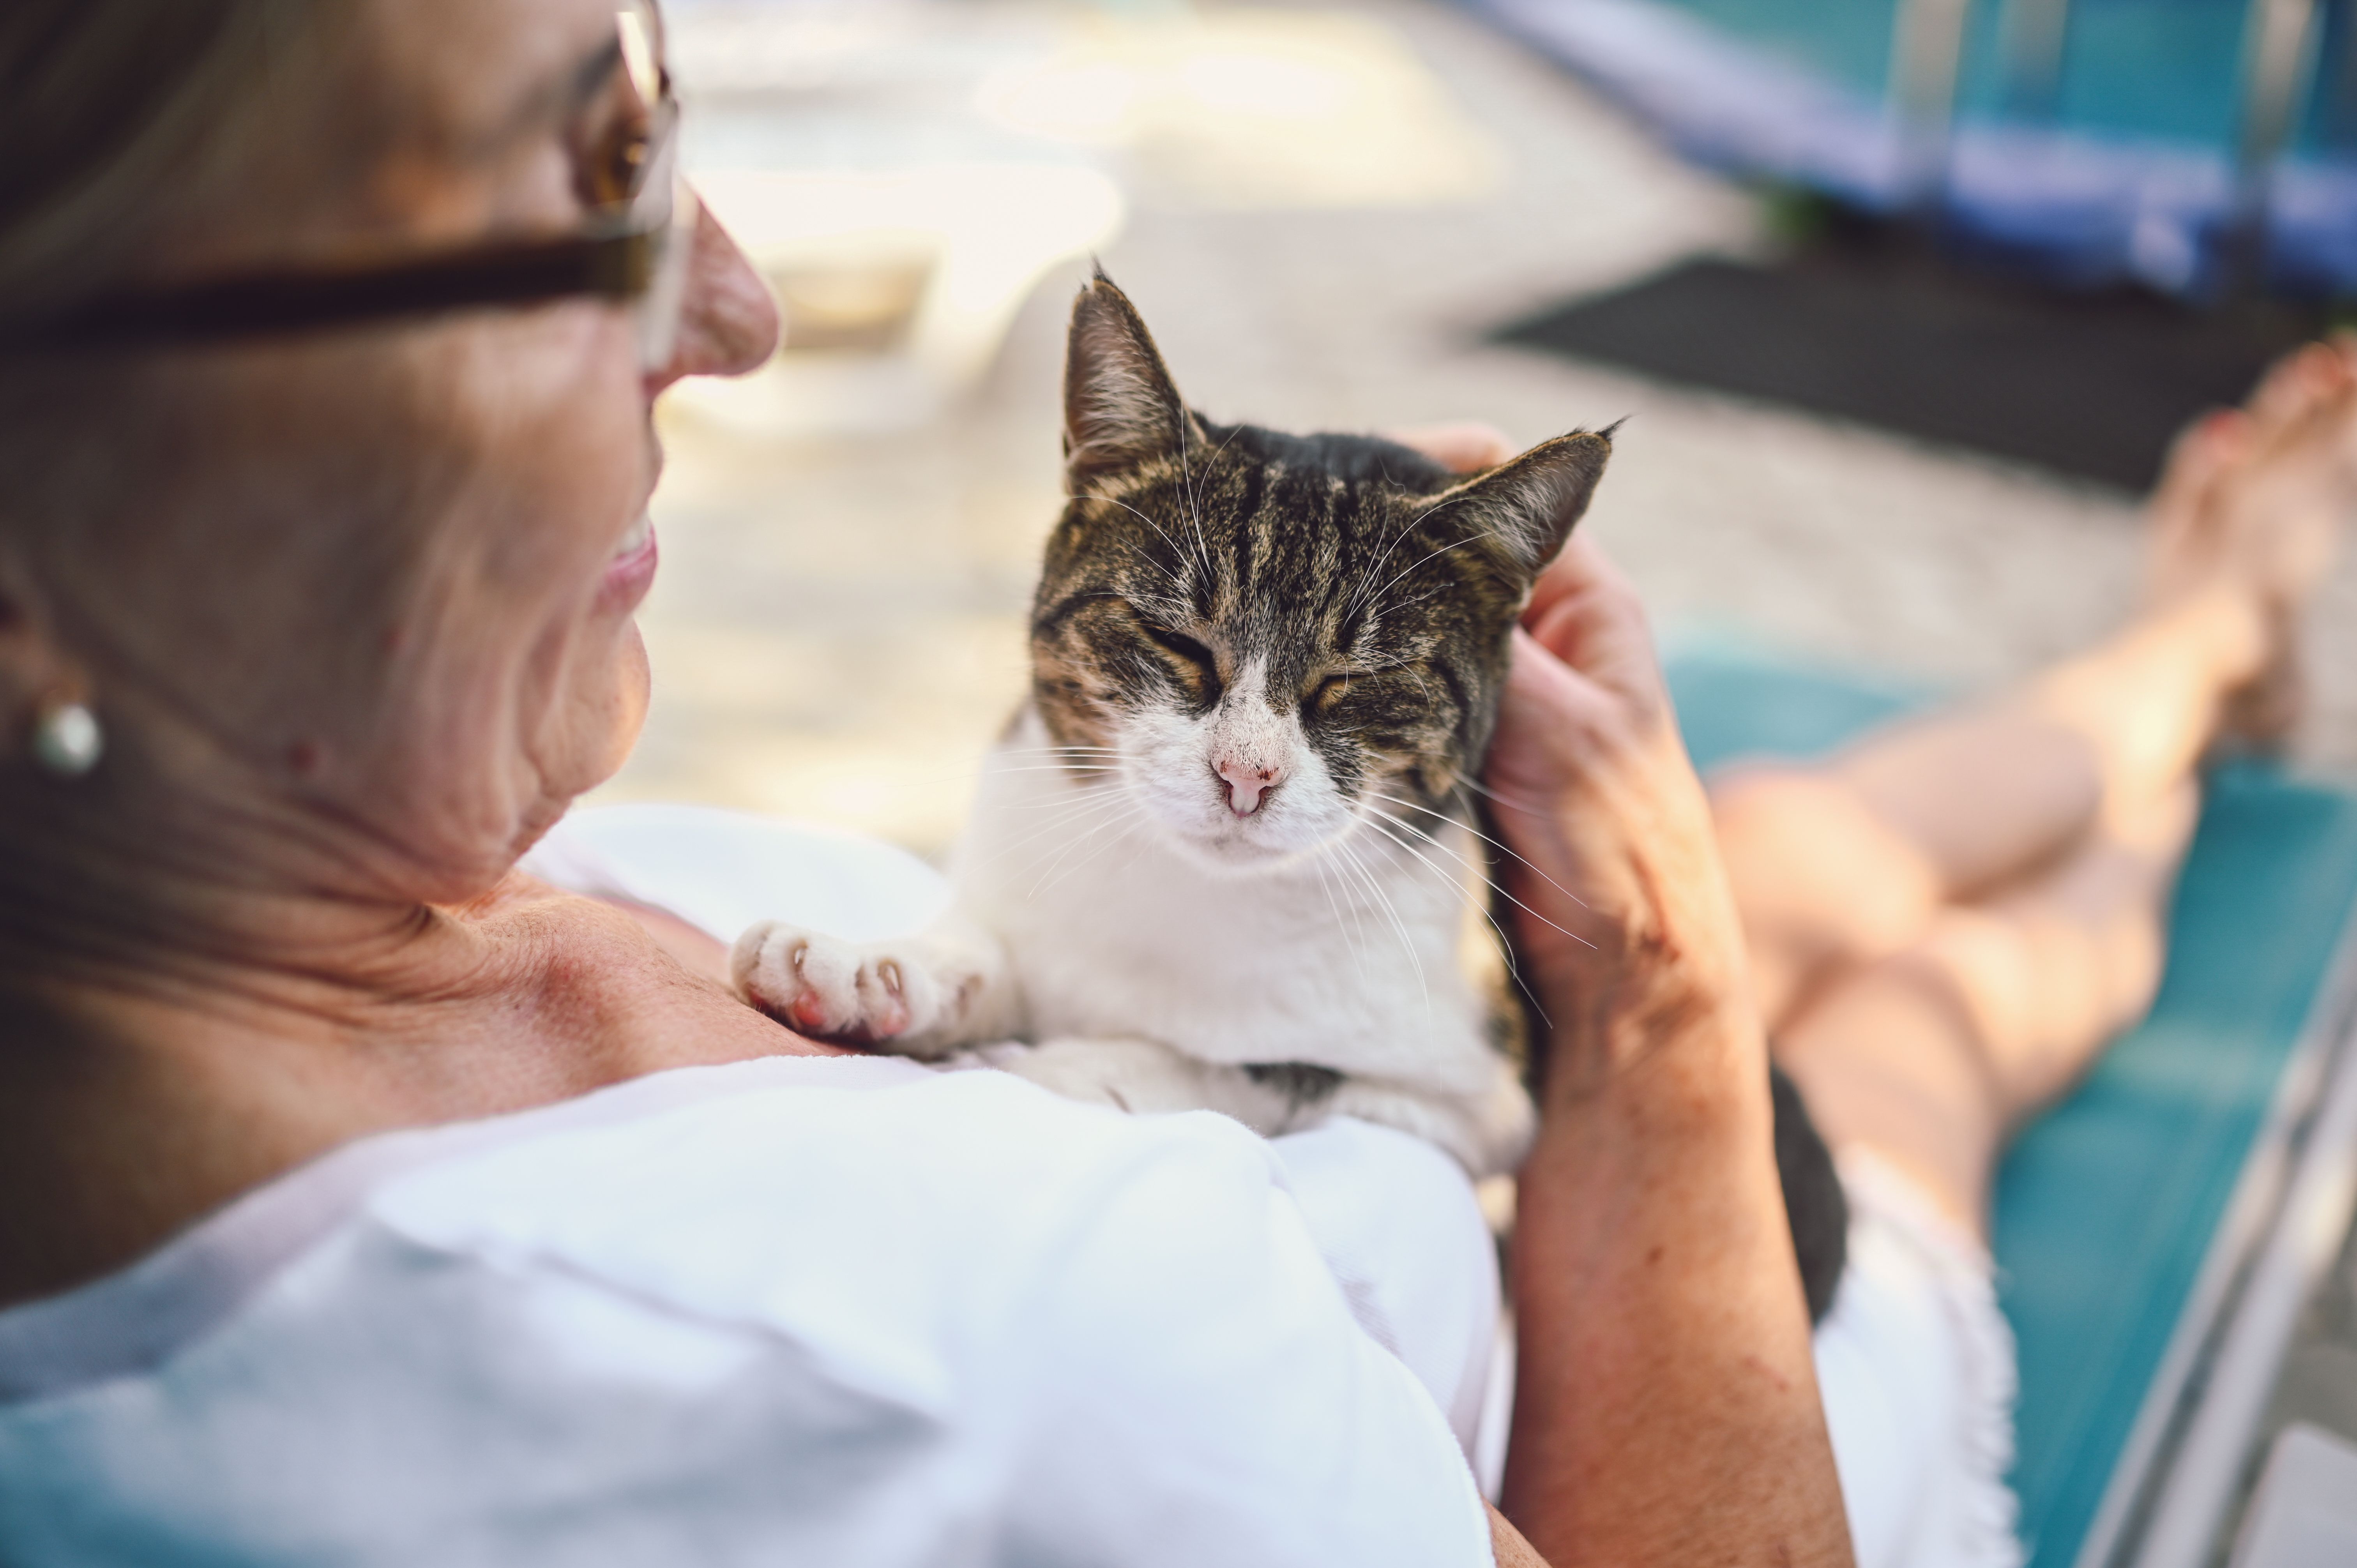 Targeting care for senior cats and their caretakers